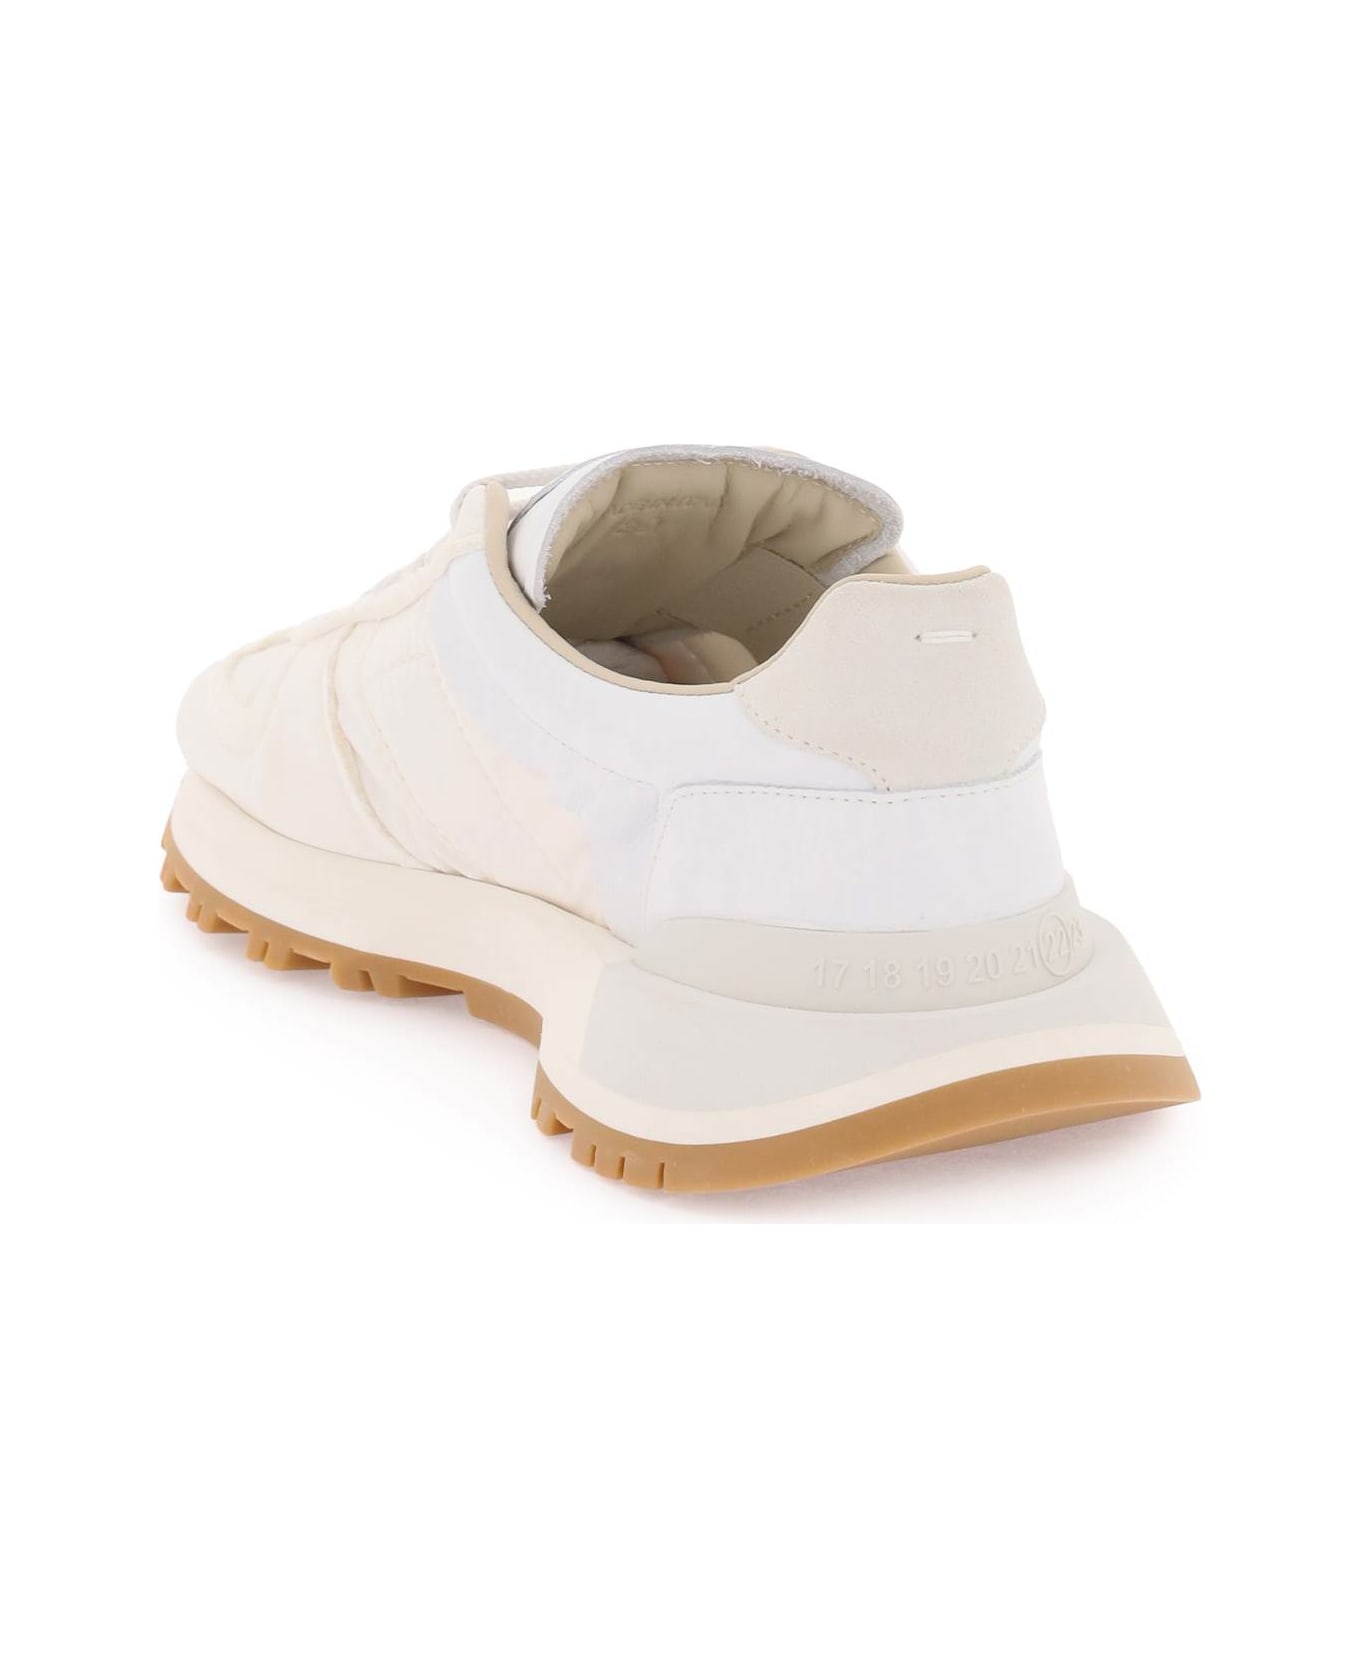 Maison Margiela Laced Low Sneakers - White スニーカー